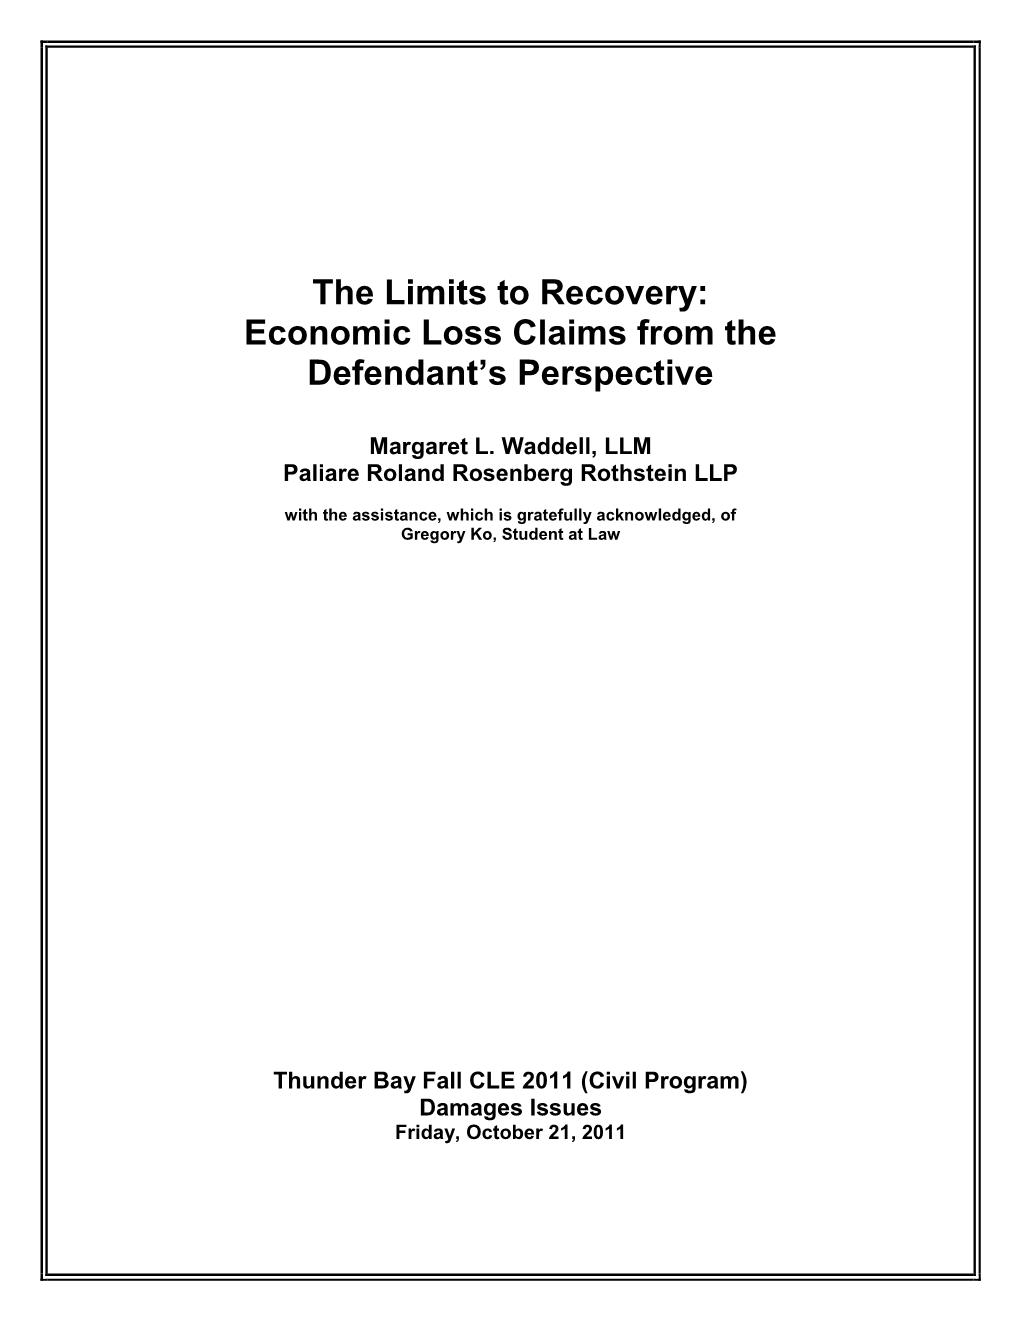 The Limits to Recovery: Economic Loss Claims from the Defendant's